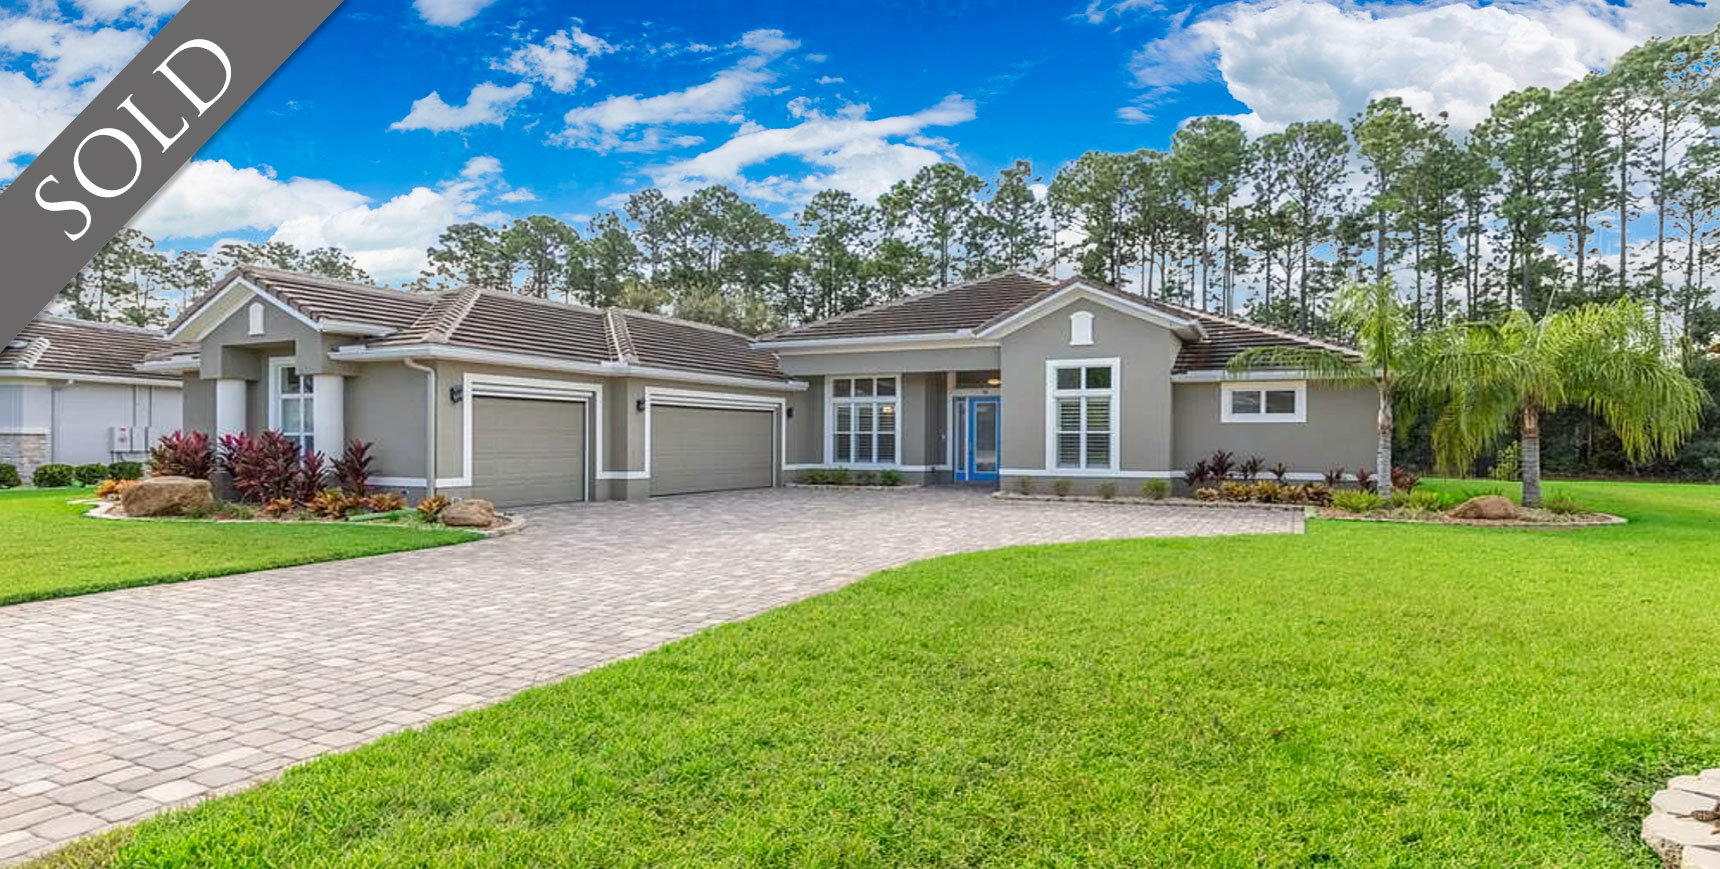 Waterfront Homes for sale in Daytona Beach Florida Sold